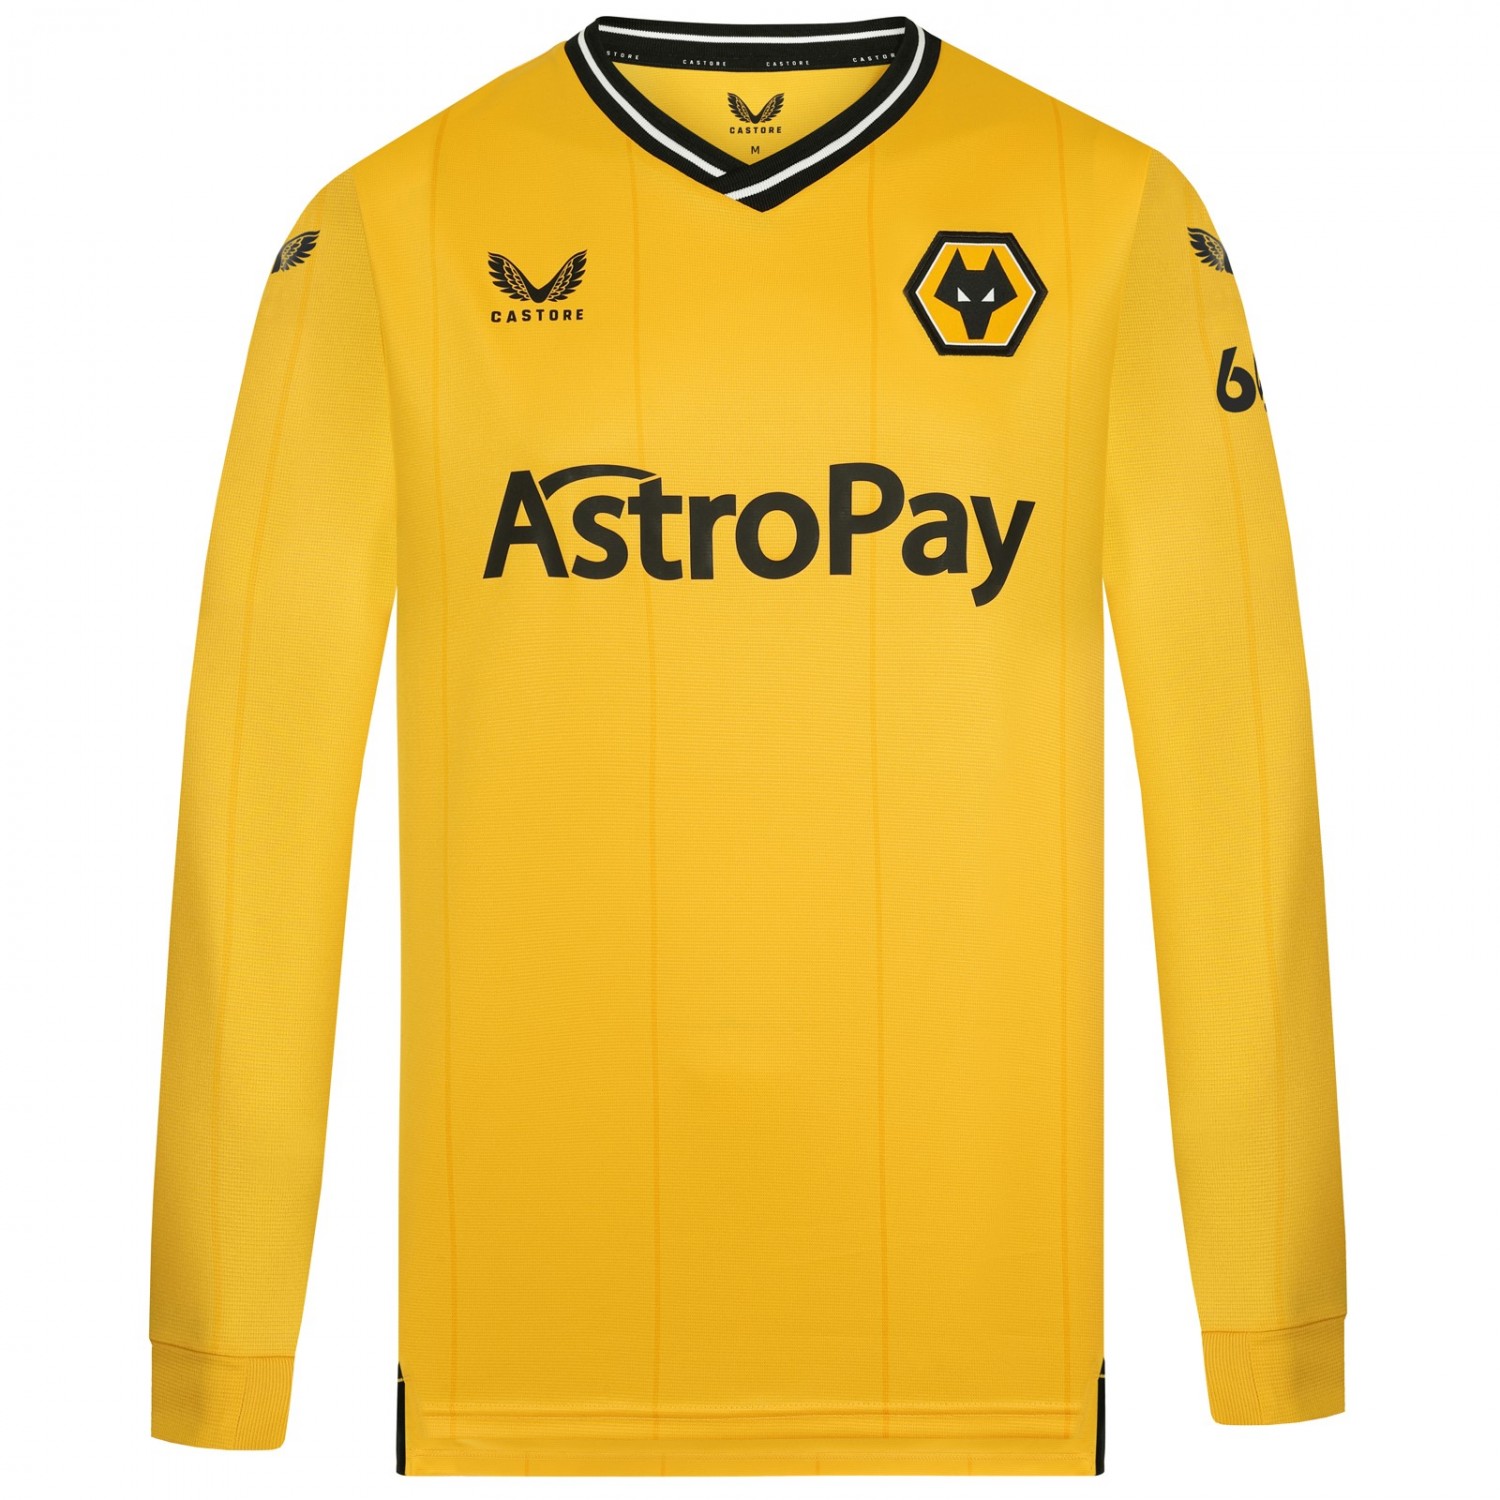 2023-24 wolves home shirt - l/s - adult
get your game face on with the 2023-24 wolves home shirt - long sleeve.
Made from 100% Polyester material, this shirt is designed to provide a comfortable fit while keeping you looking stylish during the match.
with its long sleeves and classic home shirt design, youll be comfortable during the cooler weather.
the shirt features a striking gold base and the iconic club crest proudly displayed on the chest partnered with a tapered collar in a sleek and modern design.Perfect for match days or casual everyday wear, this shirt is a must-have for any wolves fan.